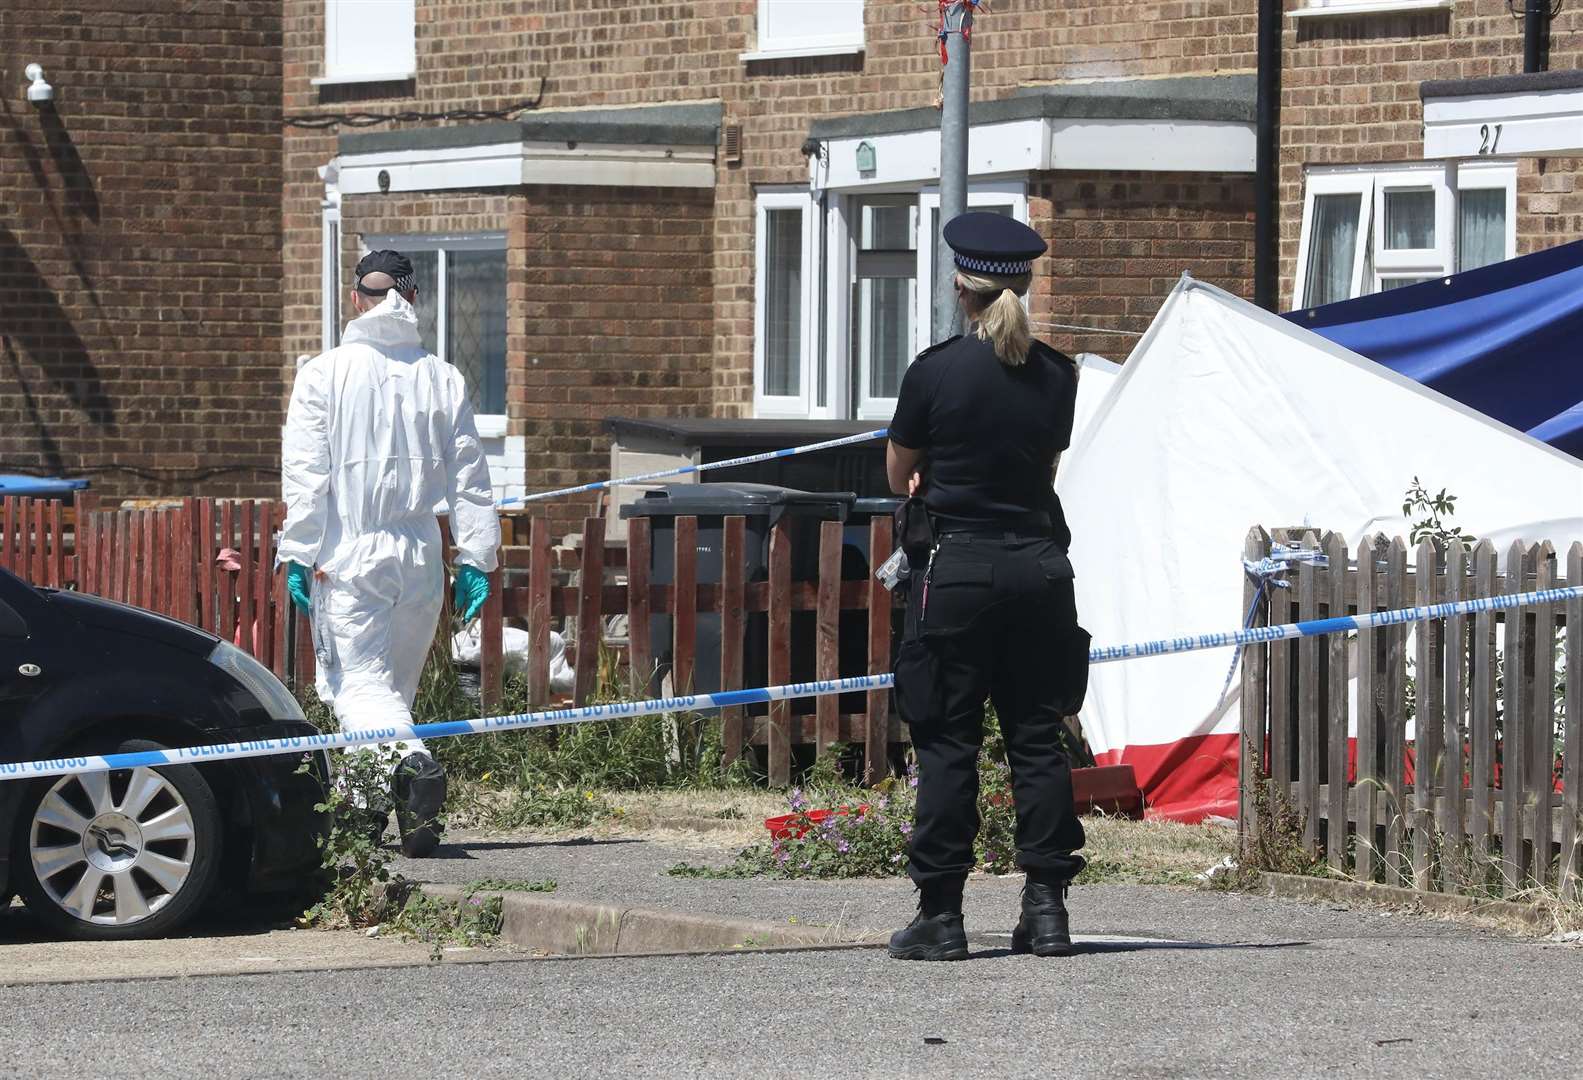 Forensics at the scene at the weekend. Picture: UKNIP